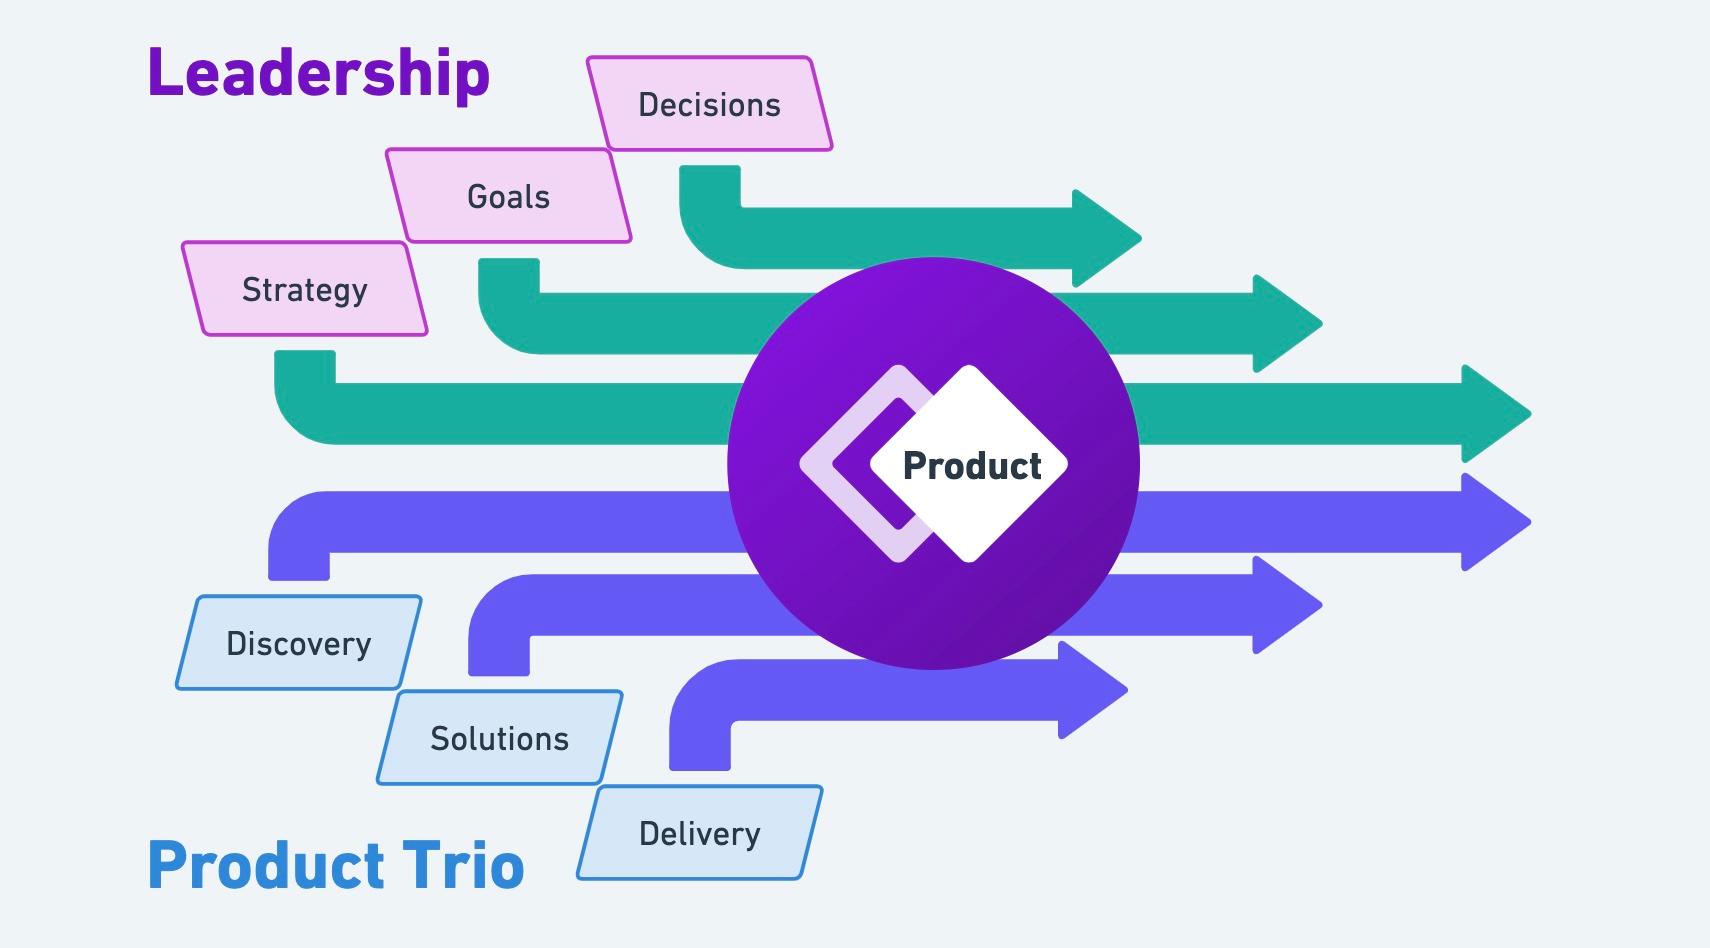 Leadership team provides Strategy, Goals & Directions. The Product Trio provides Discovery, Solutions & Delivery. All of this moves the product forward.